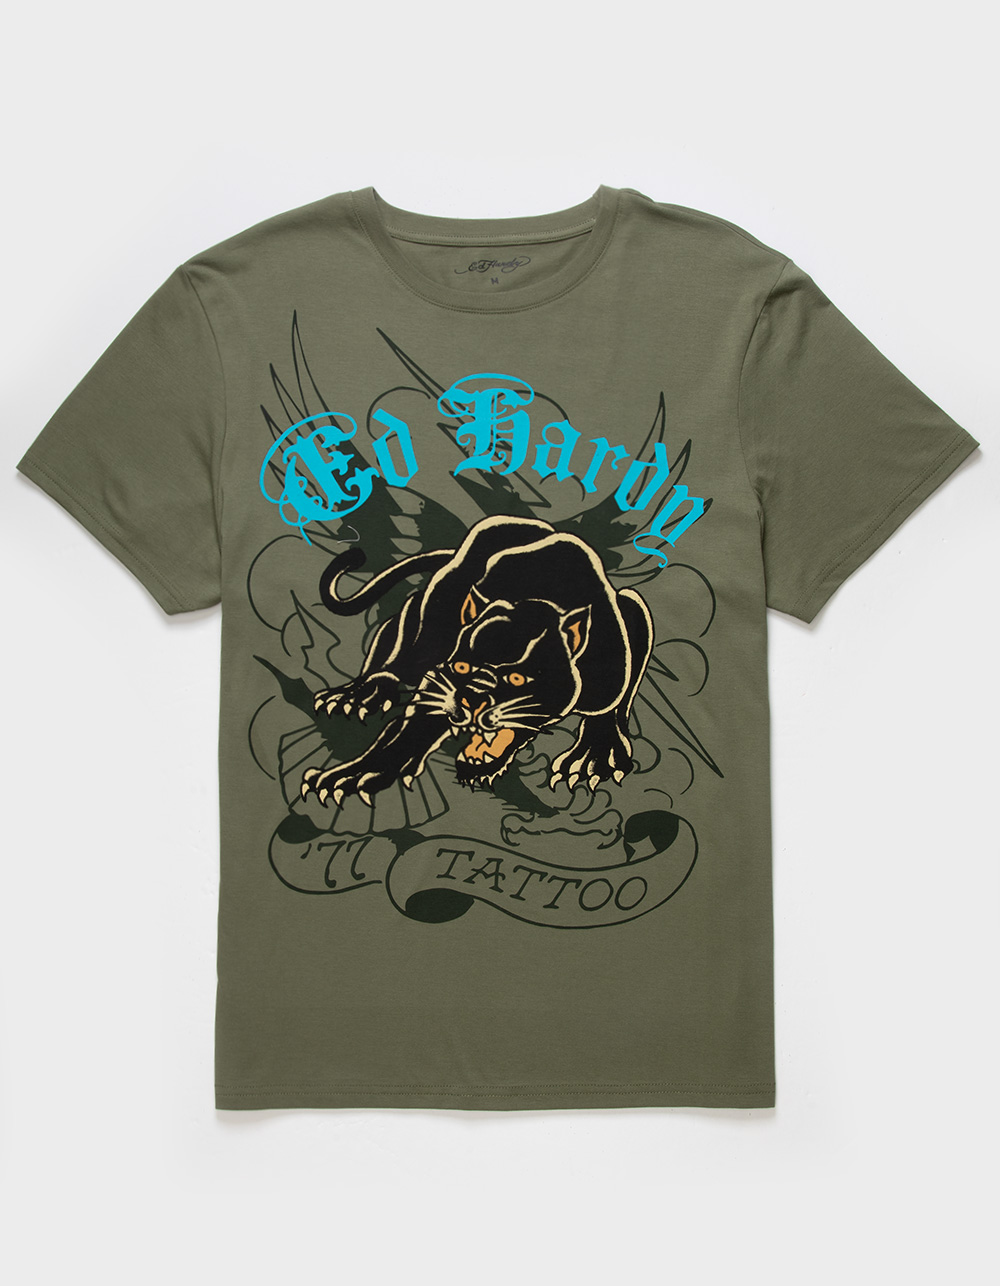 Ed Hardy Shirts for Men: Here are Our Favorites